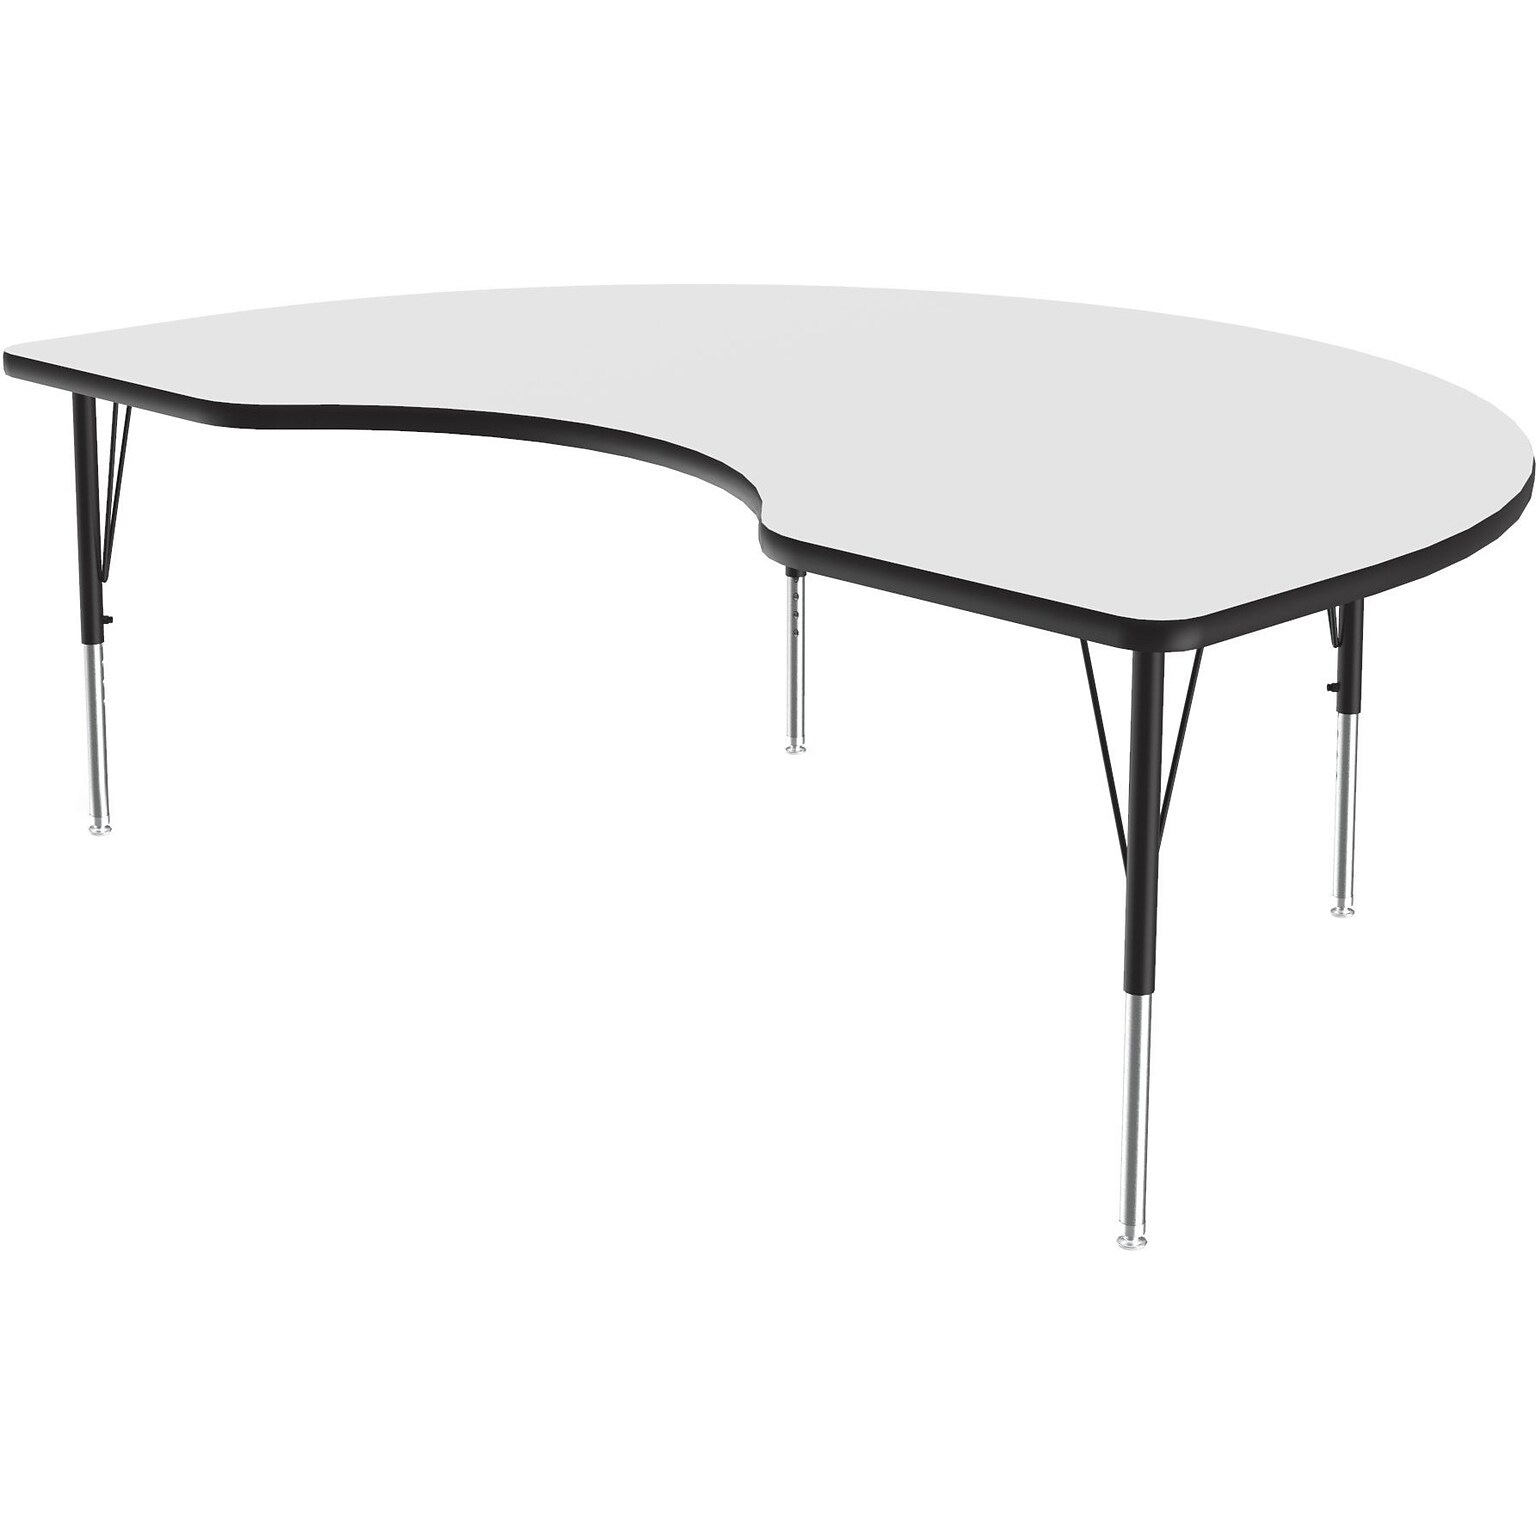 Correll Kidney-Shaped Activity Table, 72 x 48, Height-Adjustable, Frosty White/Black (A4872DE-KID-80)